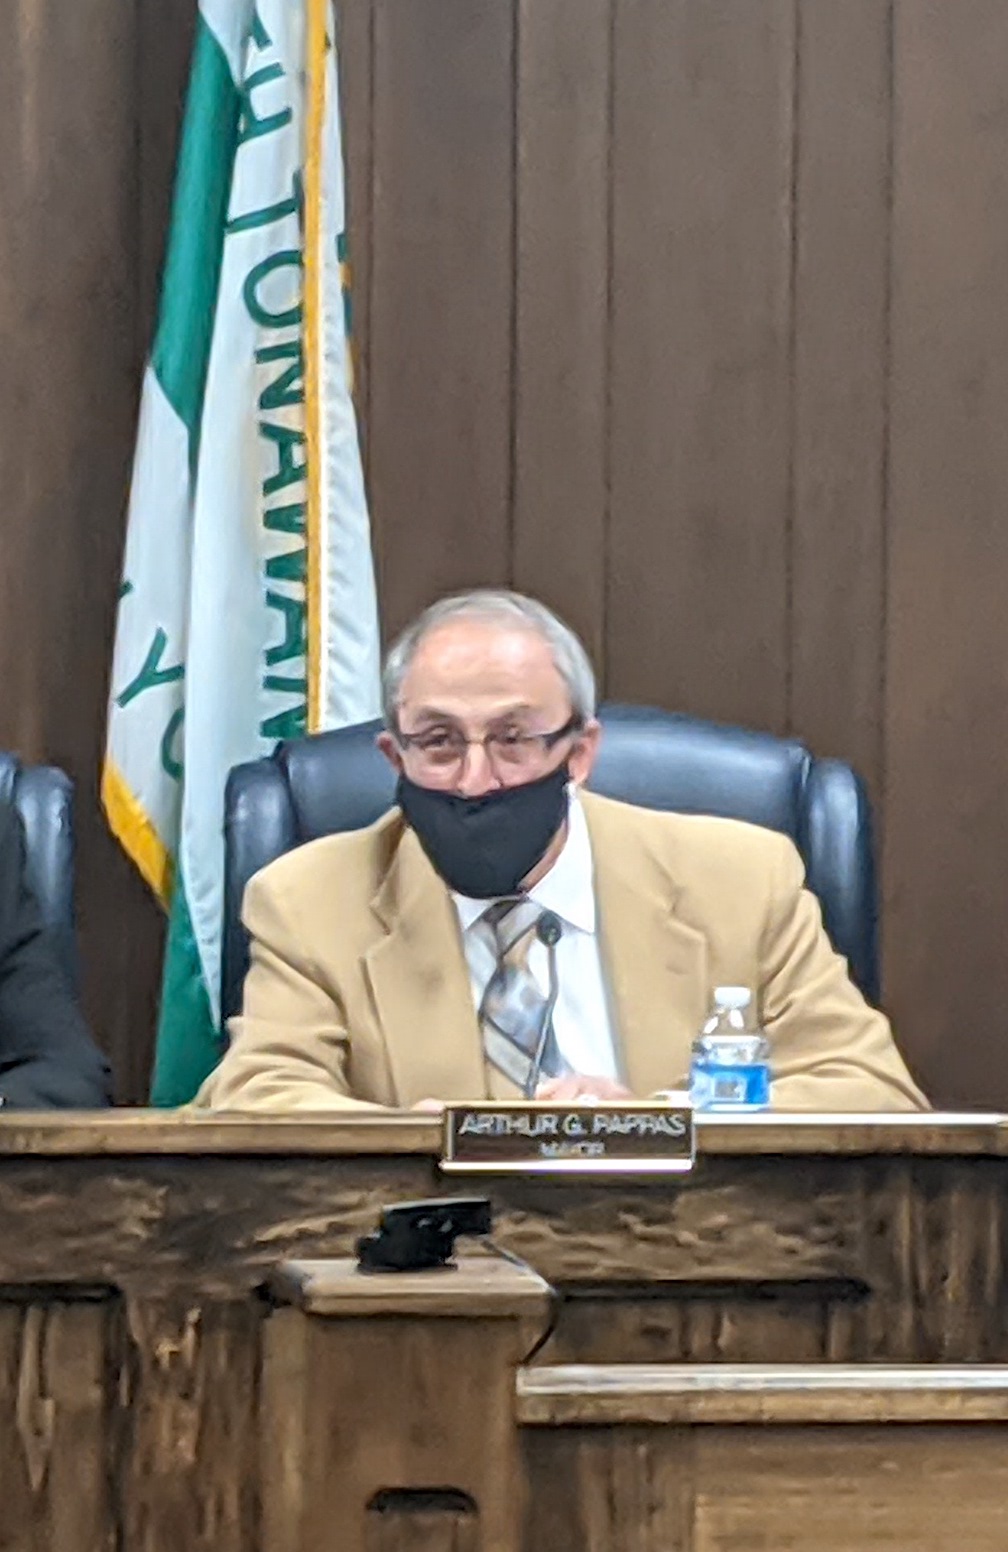 Retiring North Tonawanda Mayor Arthur G. Pappas discusses the city's struggles and success stories. (Photo by Mike DePietro)